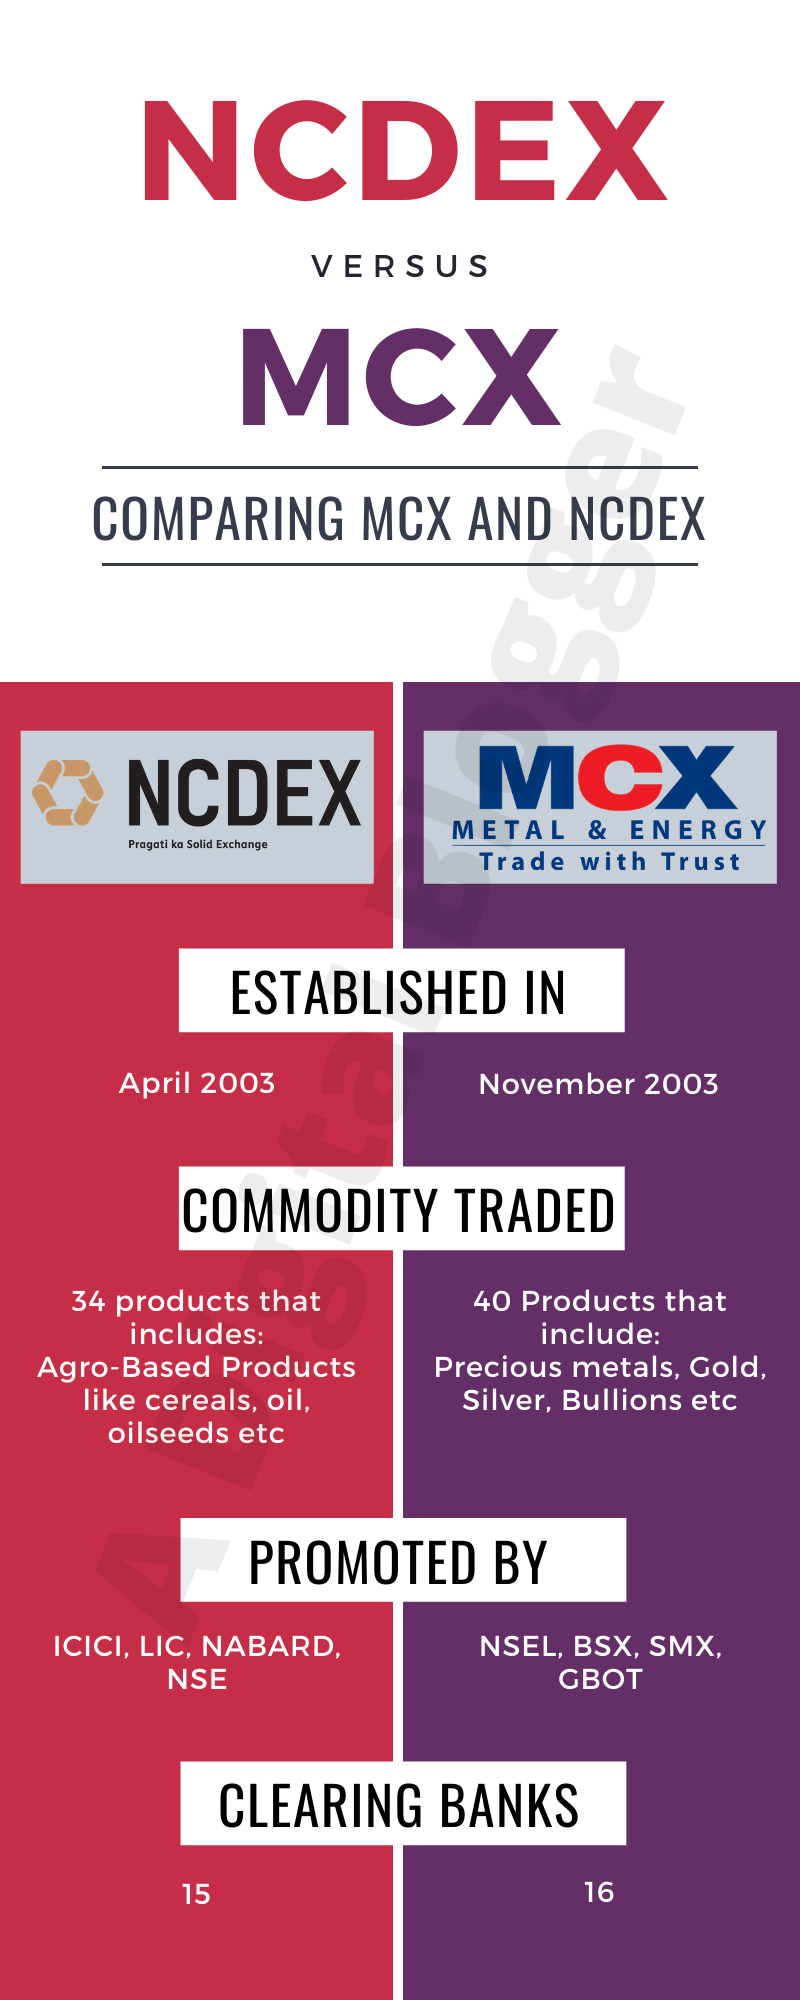 ncdex and mcx